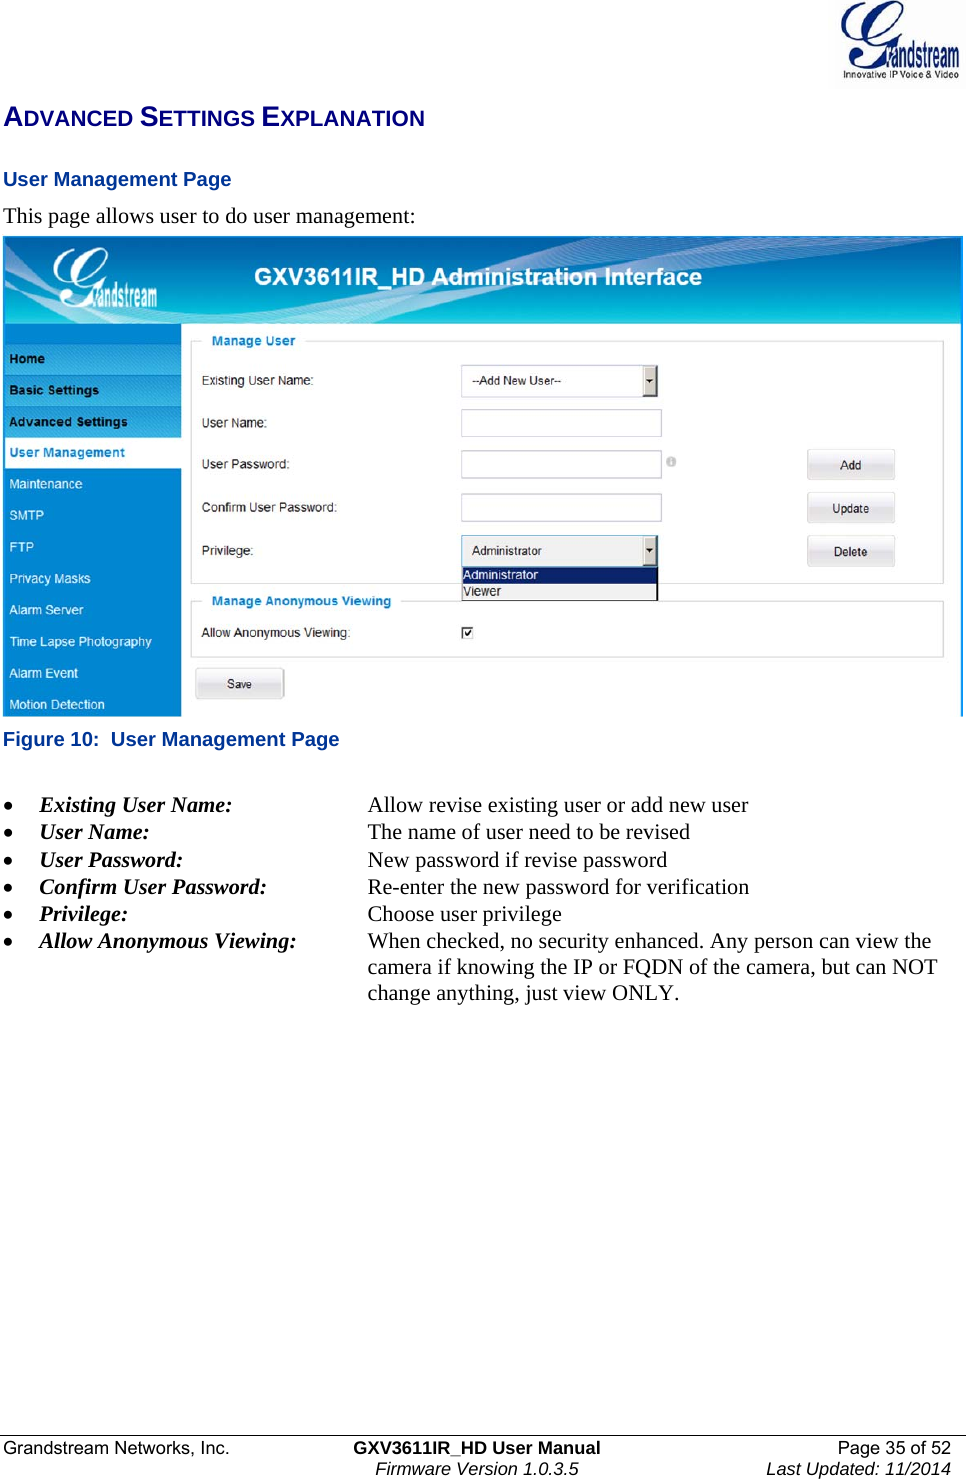  Grandstream Networks, Inc.  GXV3611IR_HD User Manual  Page 35 of 52    Firmware Version 1.0.3.5  Last Updated: 11/2014 ADVANCED SETTINGS EXPLANATION  User Management Page  This page allows user to do user management:  Figure 10:  User Management Page   Existing User Name:     Allow revise existing user or add new user  User Name:      The name of user need to be revised  User Password:       New password if revise password  Confirm User Password:     Re-enter the new password for verification  Privilege:     Choose user privilege  Allow Anonymous Viewing:  When checked, no security enhanced. Any person can view the            camera if knowing the IP or FQDN of the camera, but can NOT            change anything, just view ONLY.    